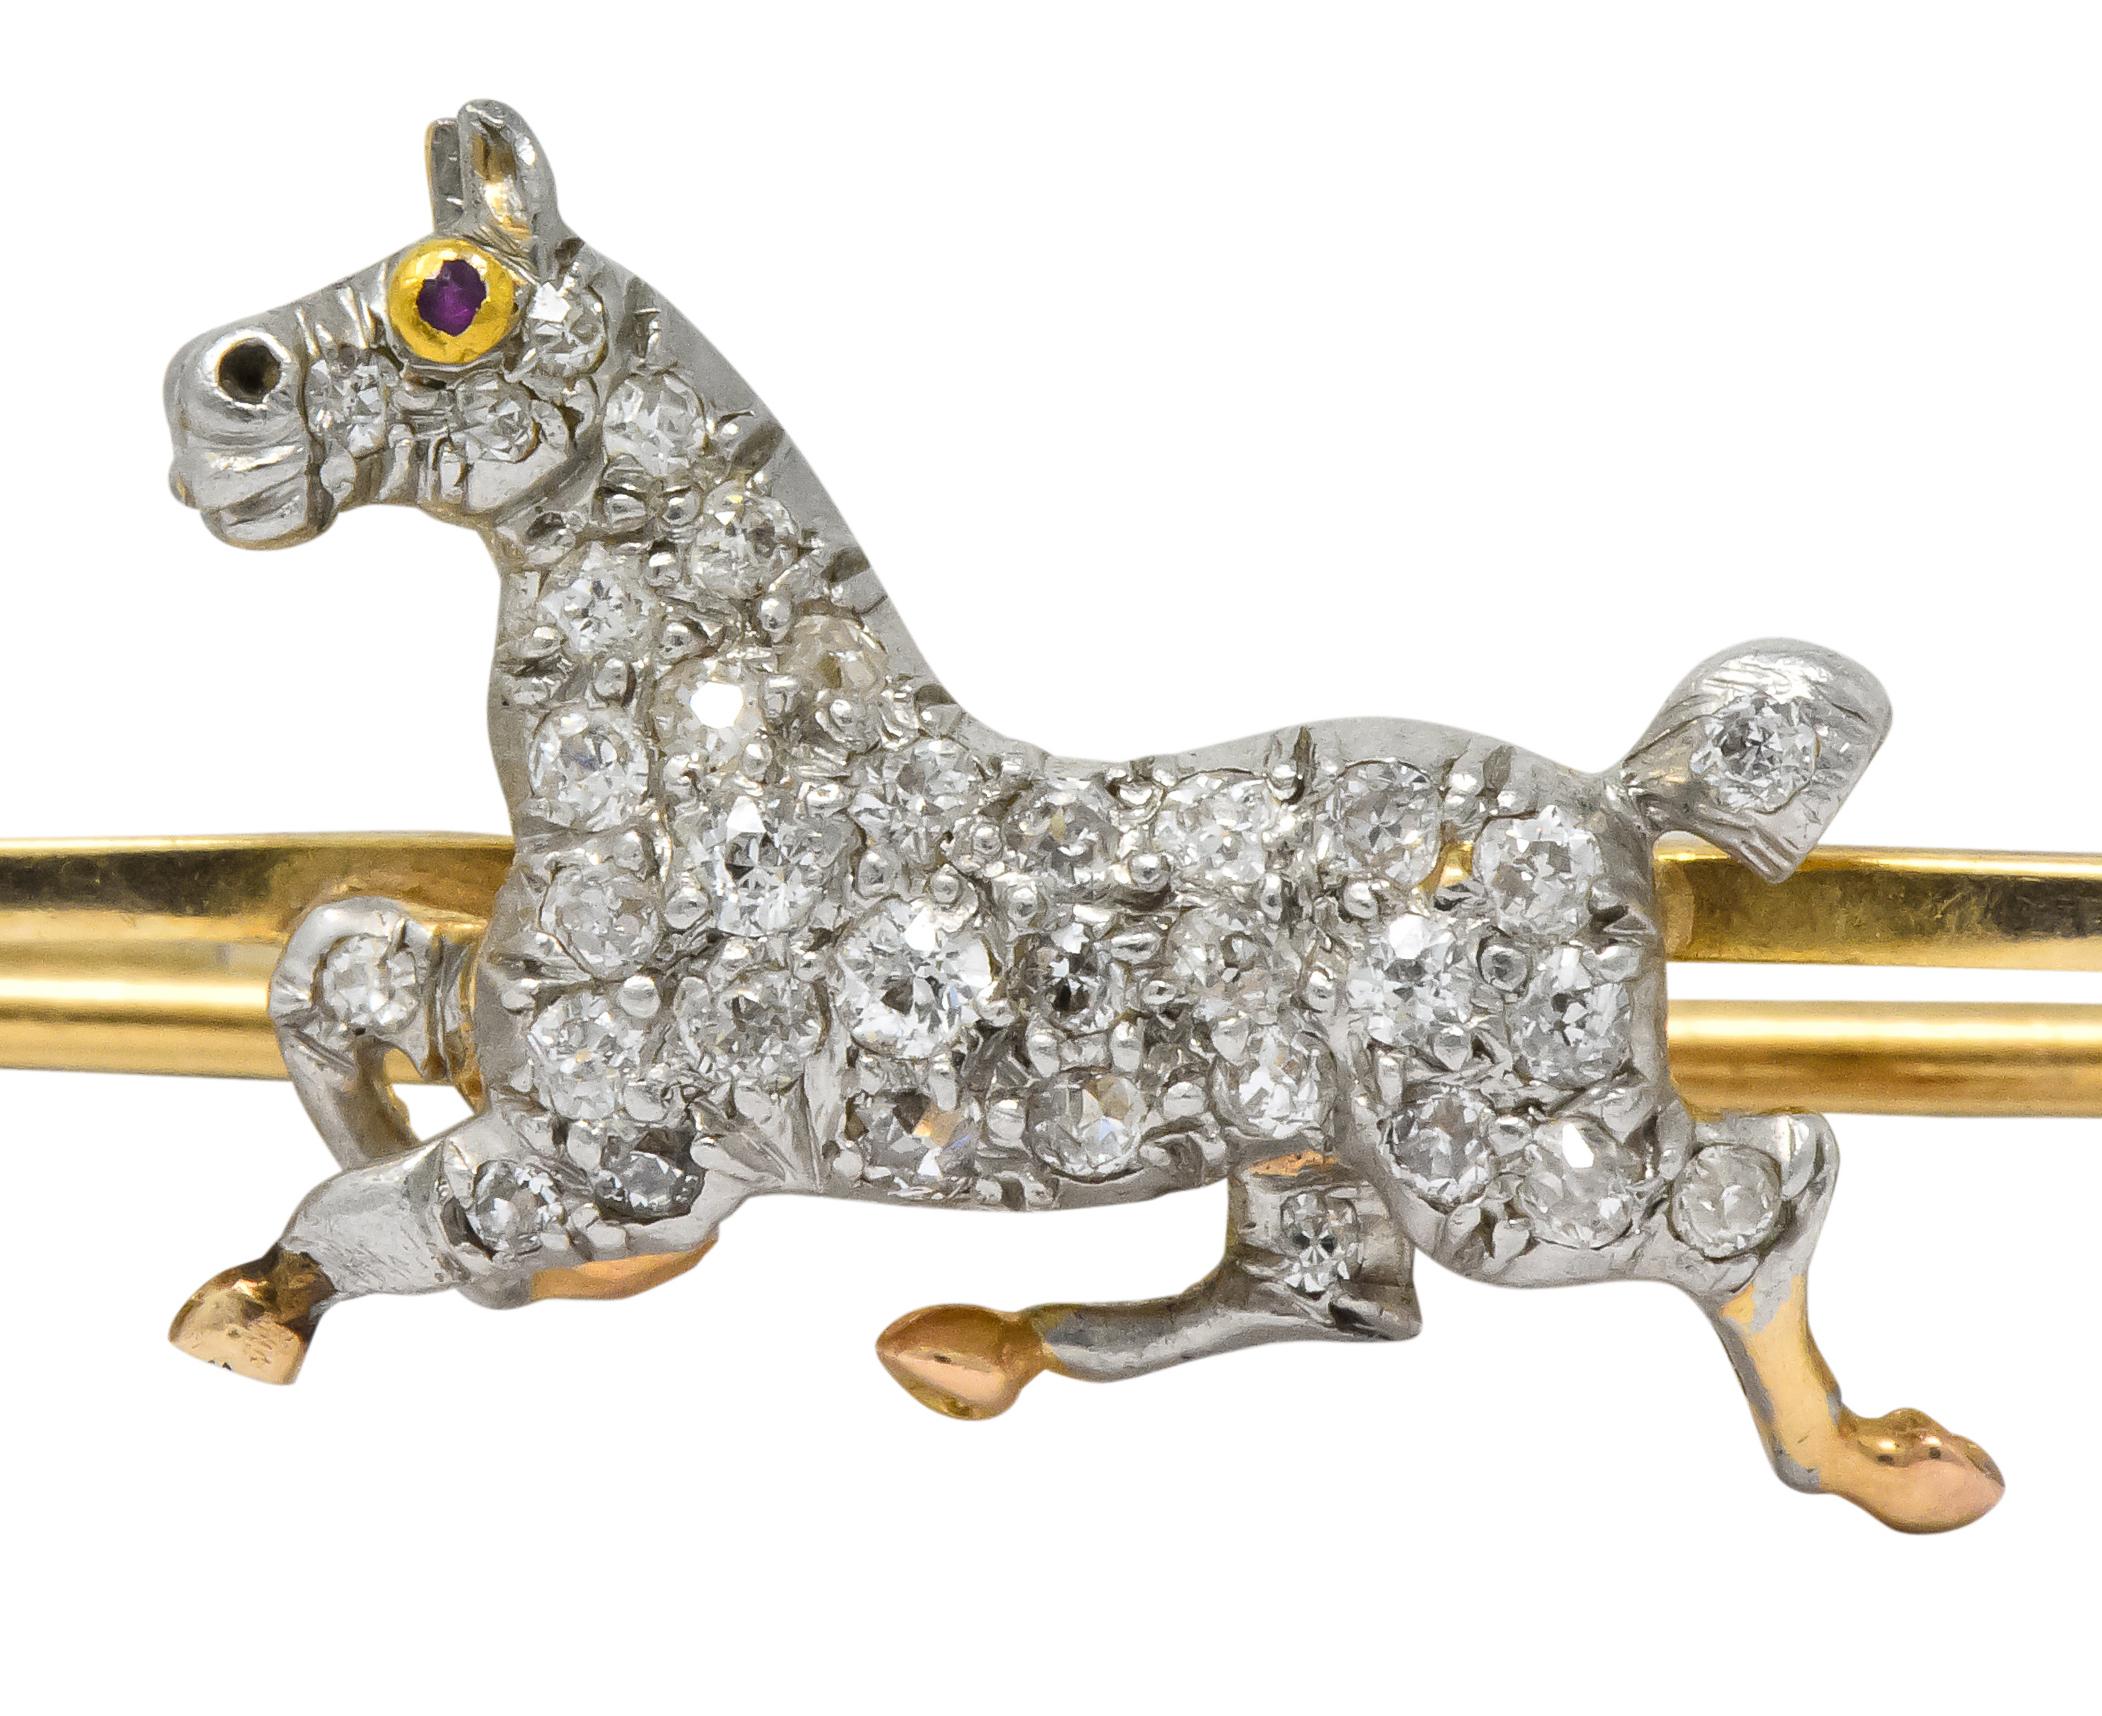 Designed as a galloping horse with diamonds set throughout and a round cut ruby eye

Set with old European and Swiss cut diamonds, total diamond weight approximately 0.55 carat. GHI color and VS to SI clarity

On a safety pin style finding

Pin